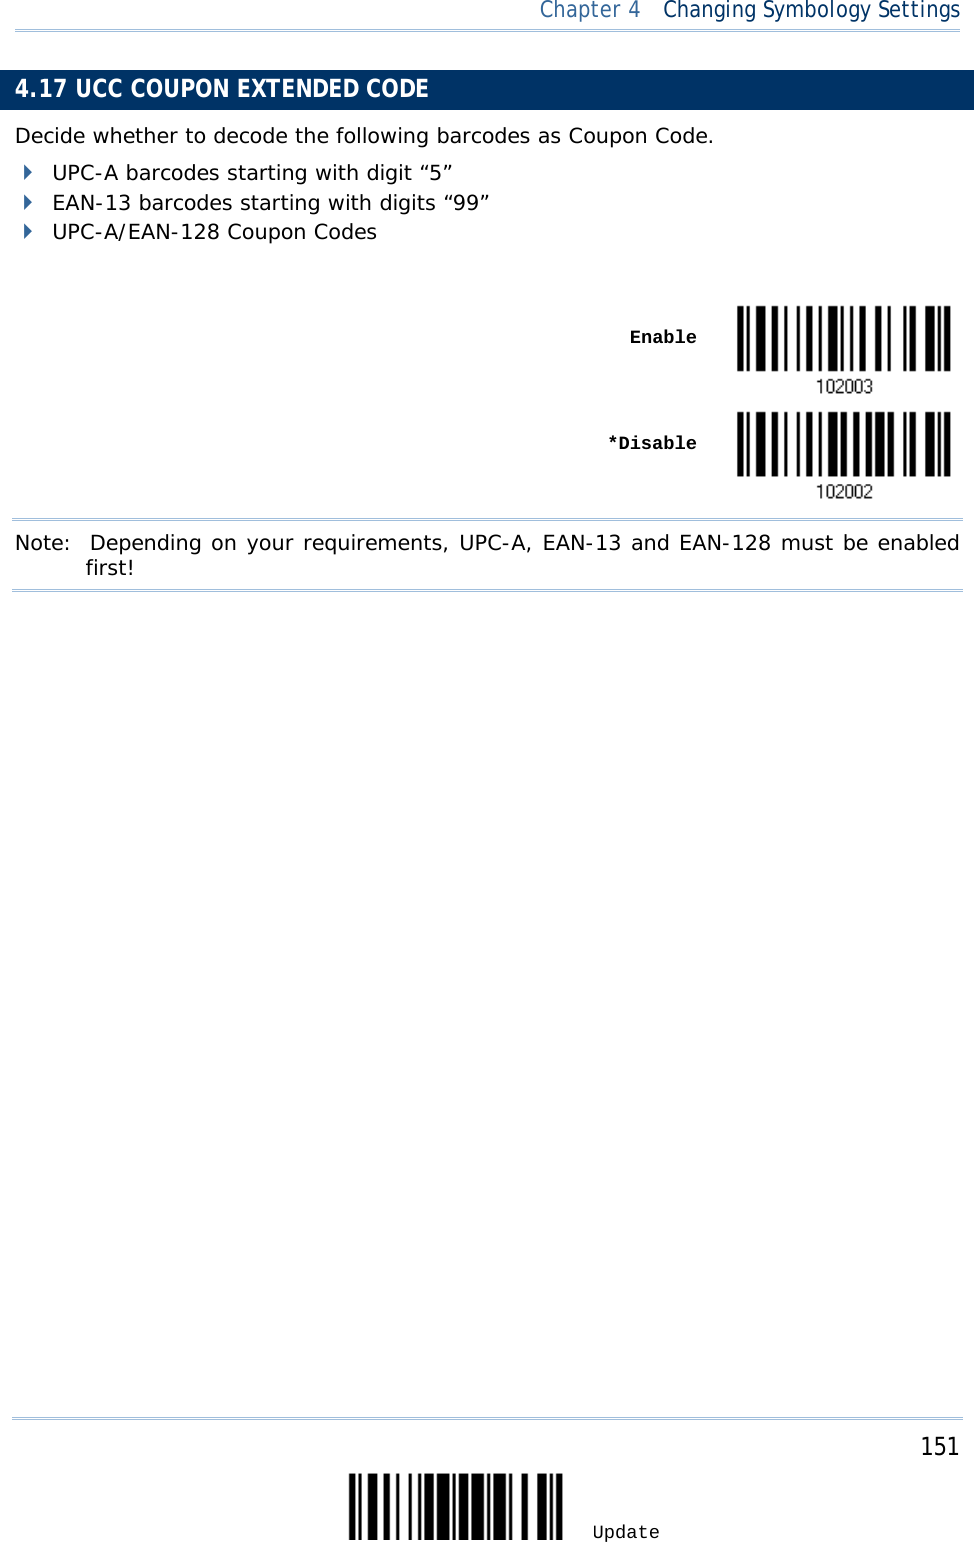  Chapter 4  Changing Symbology Settings  4.17 UCC COUPON EXTENDED CODE Decide whether to decode the following barcodes as Coupon Code.  UPC-A barcodes starting with digit “5”  EAN-13 barcodes starting with digits “99”  UPC-A/EAN-128 Coupon Codes     Enable     *Disable  Note:   Depending on your requirements, UPC-A, EAN-13 and EAN-128 must be enabled first!                   151 Update 